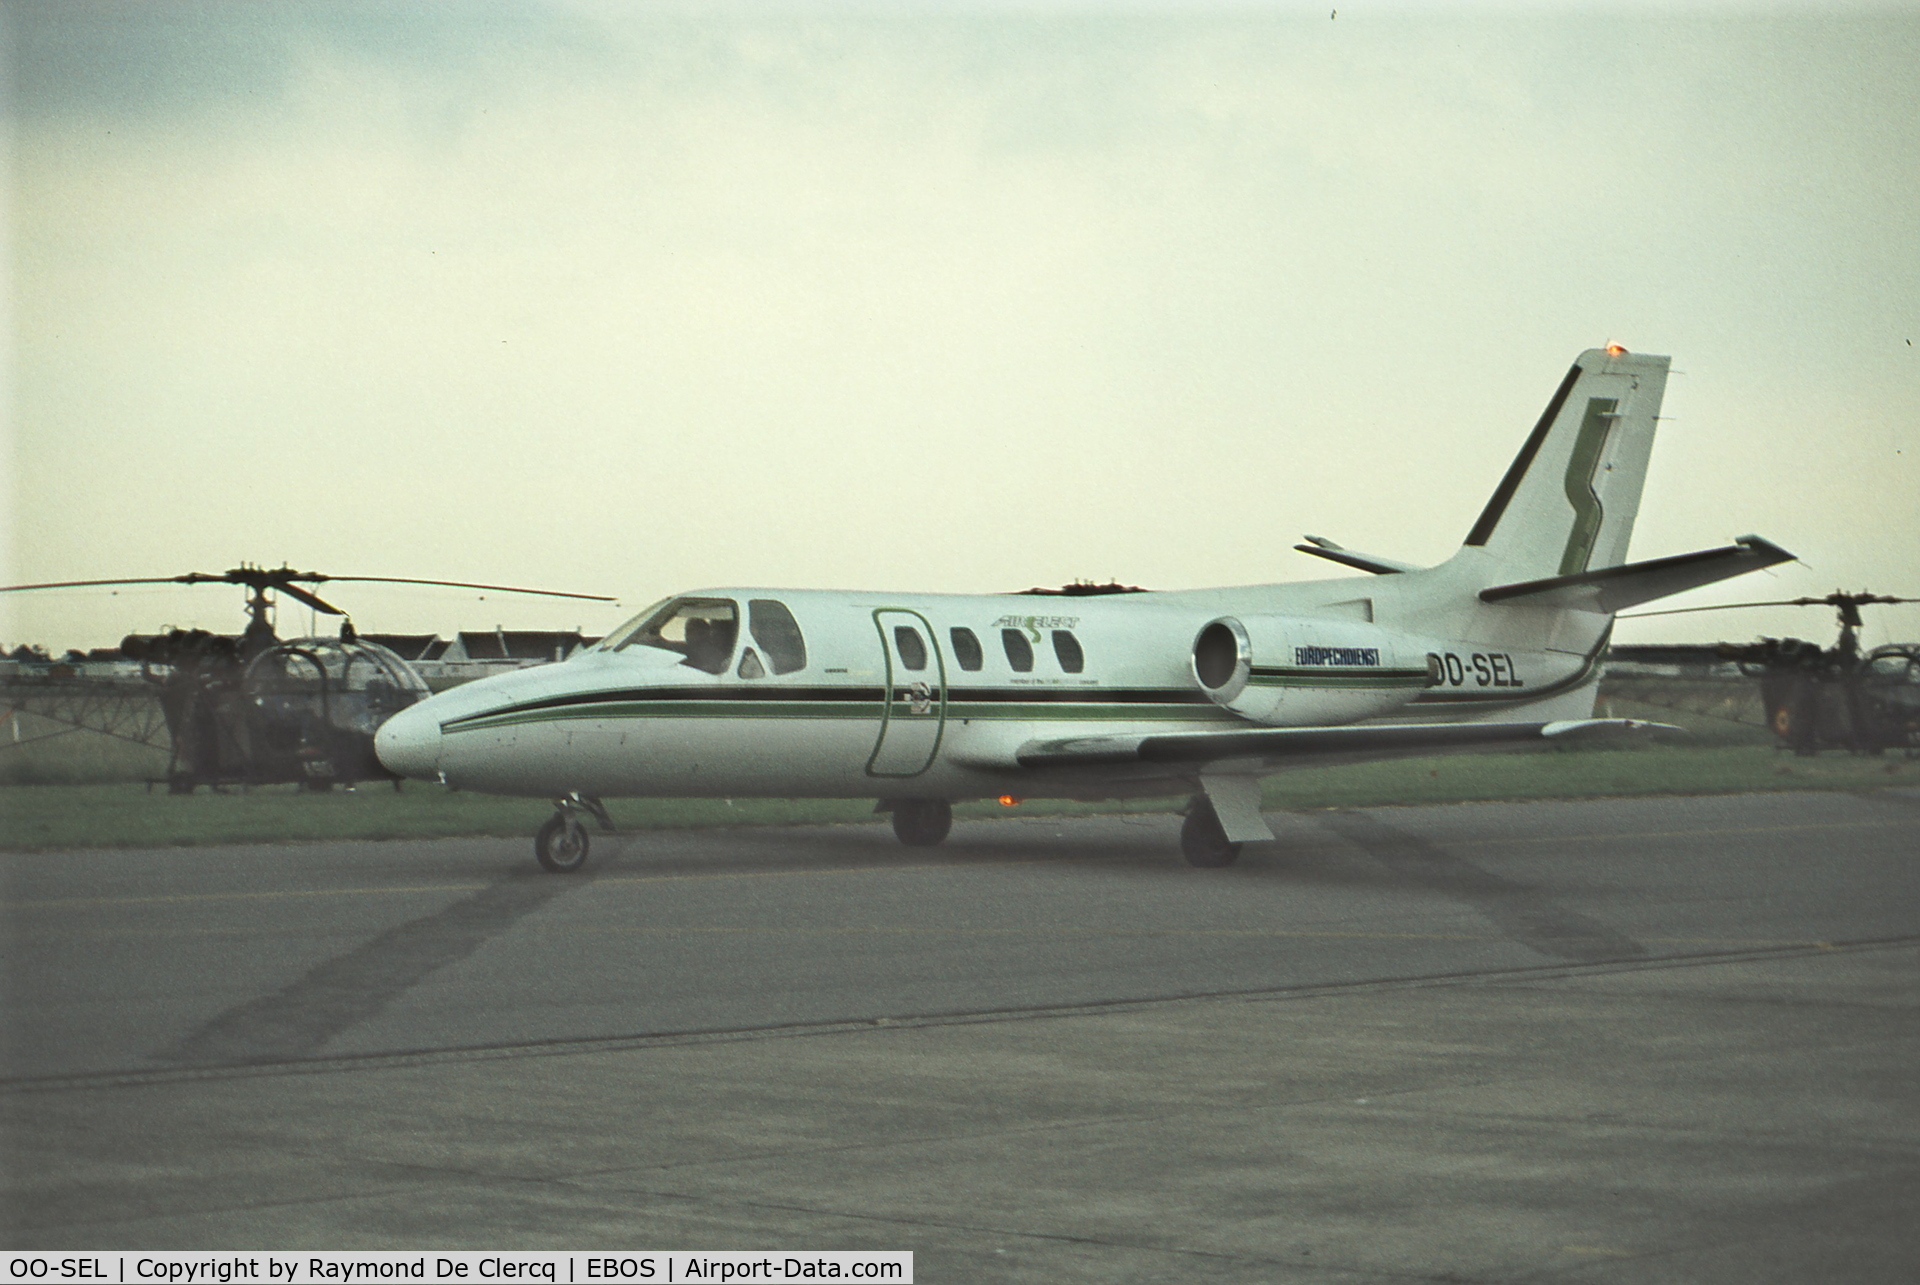 OO-SEL, 1973 Cessna 500 Citation I C/N 500-0133, At Ostend in mid-seventies.